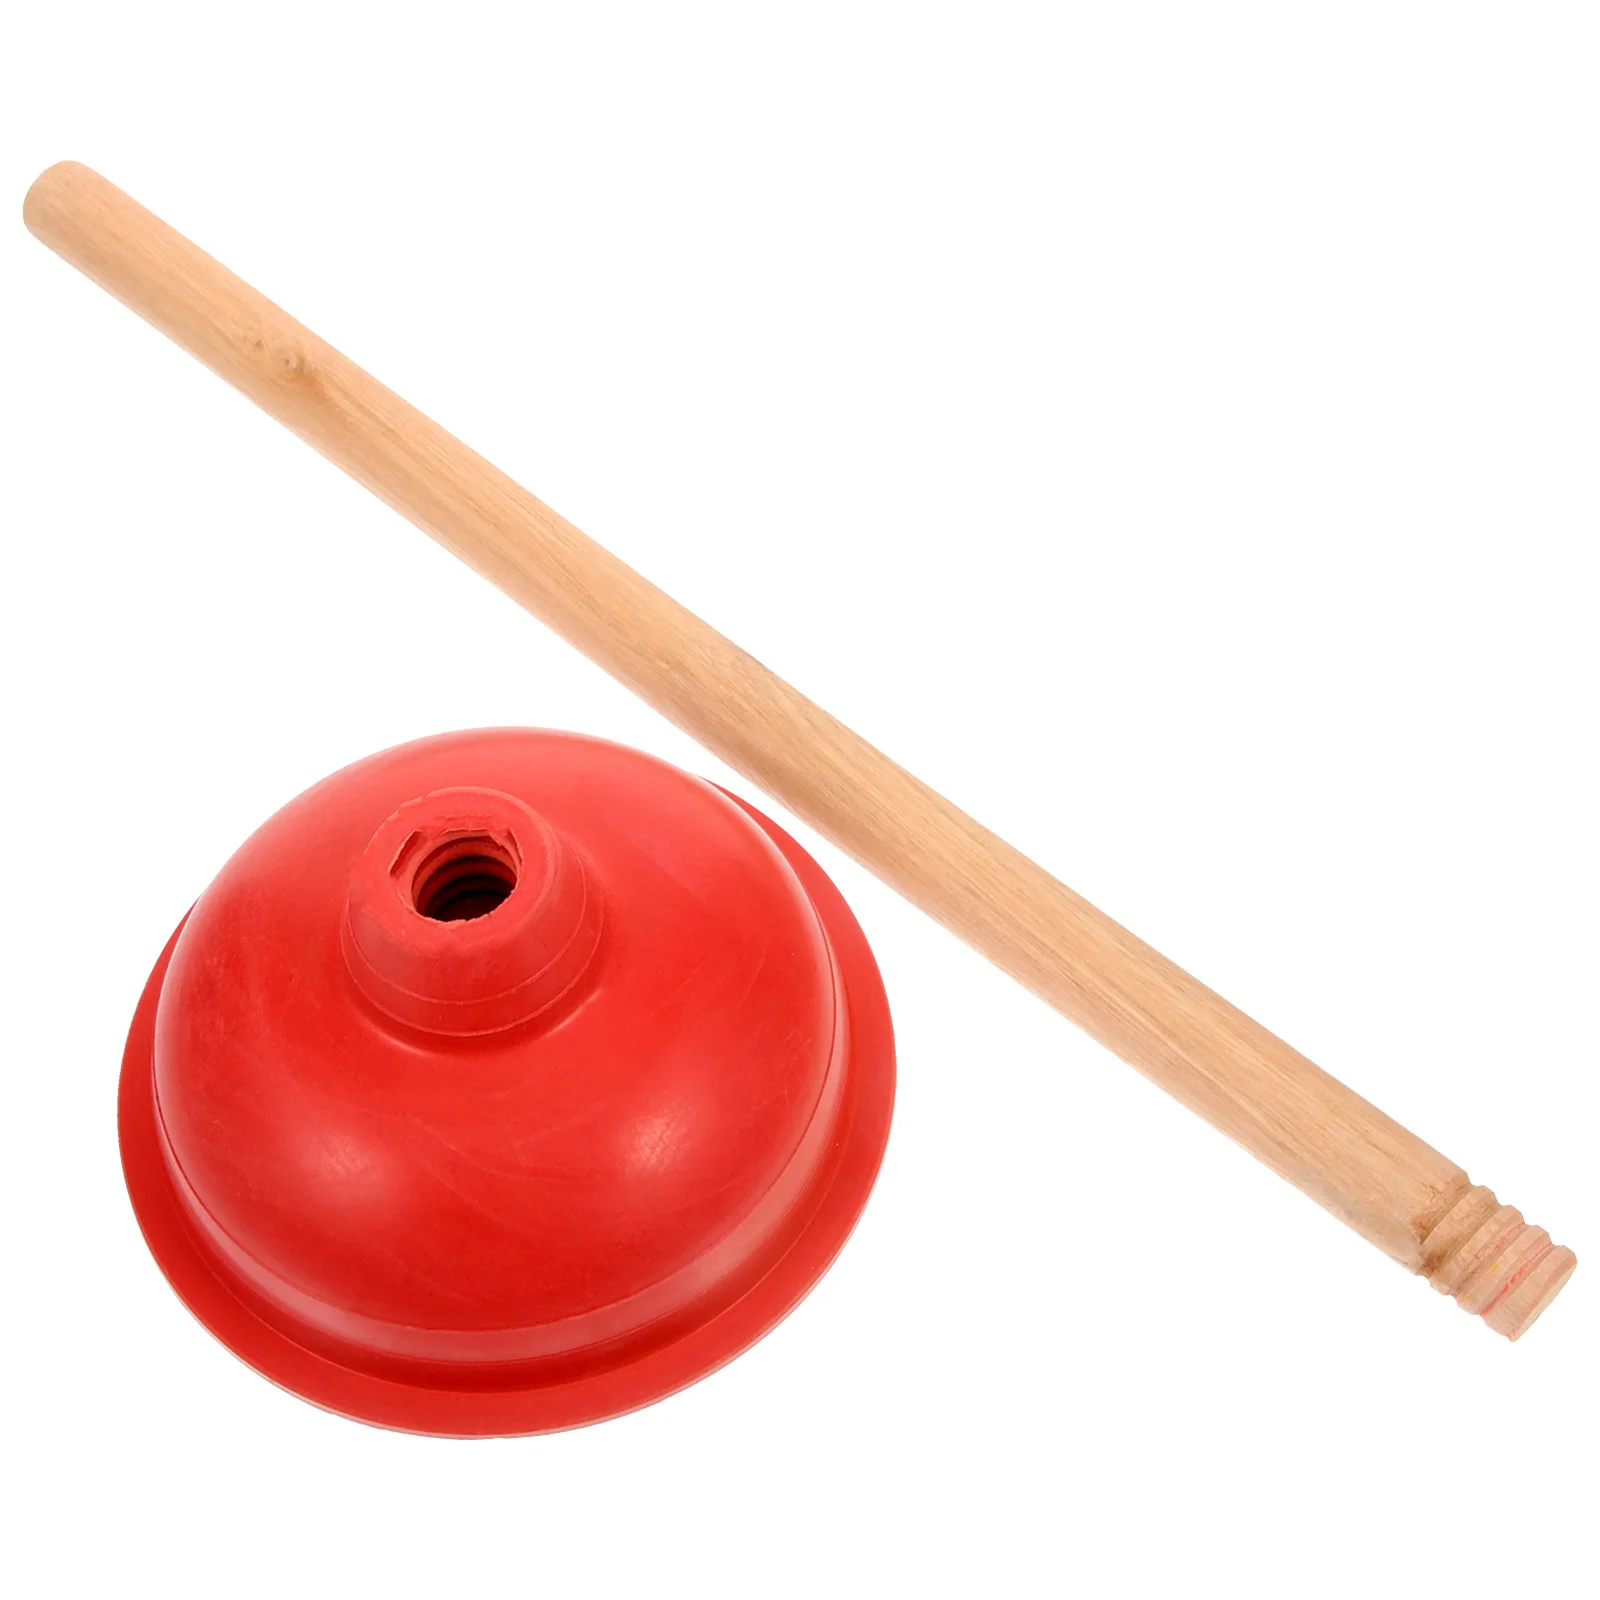 

Plumbing Fittings Bathroom Plunger Drain Cleaning Tool Toilet Sink Plungers Sanitary Wood Dormitory Small Heavy Duty